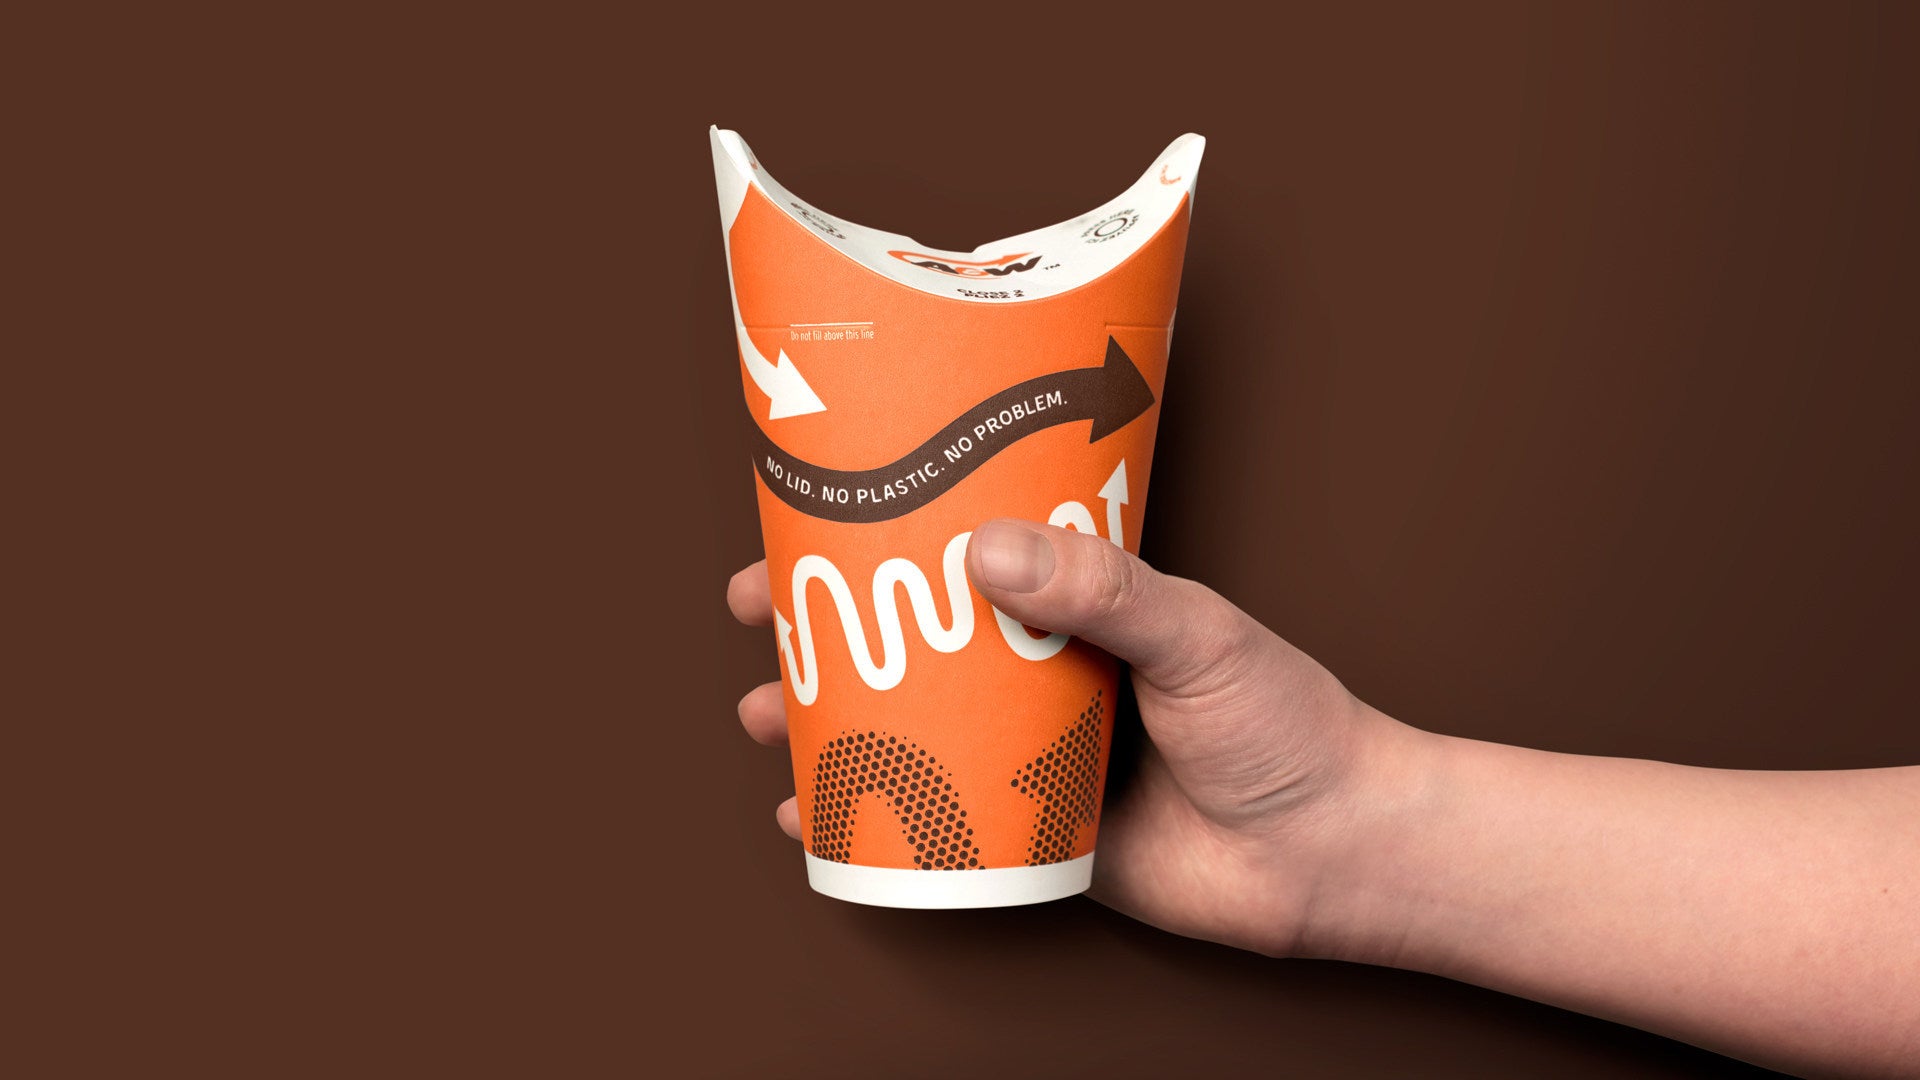 A&W Canada pilots sustainable cup at restaurants in Toronto